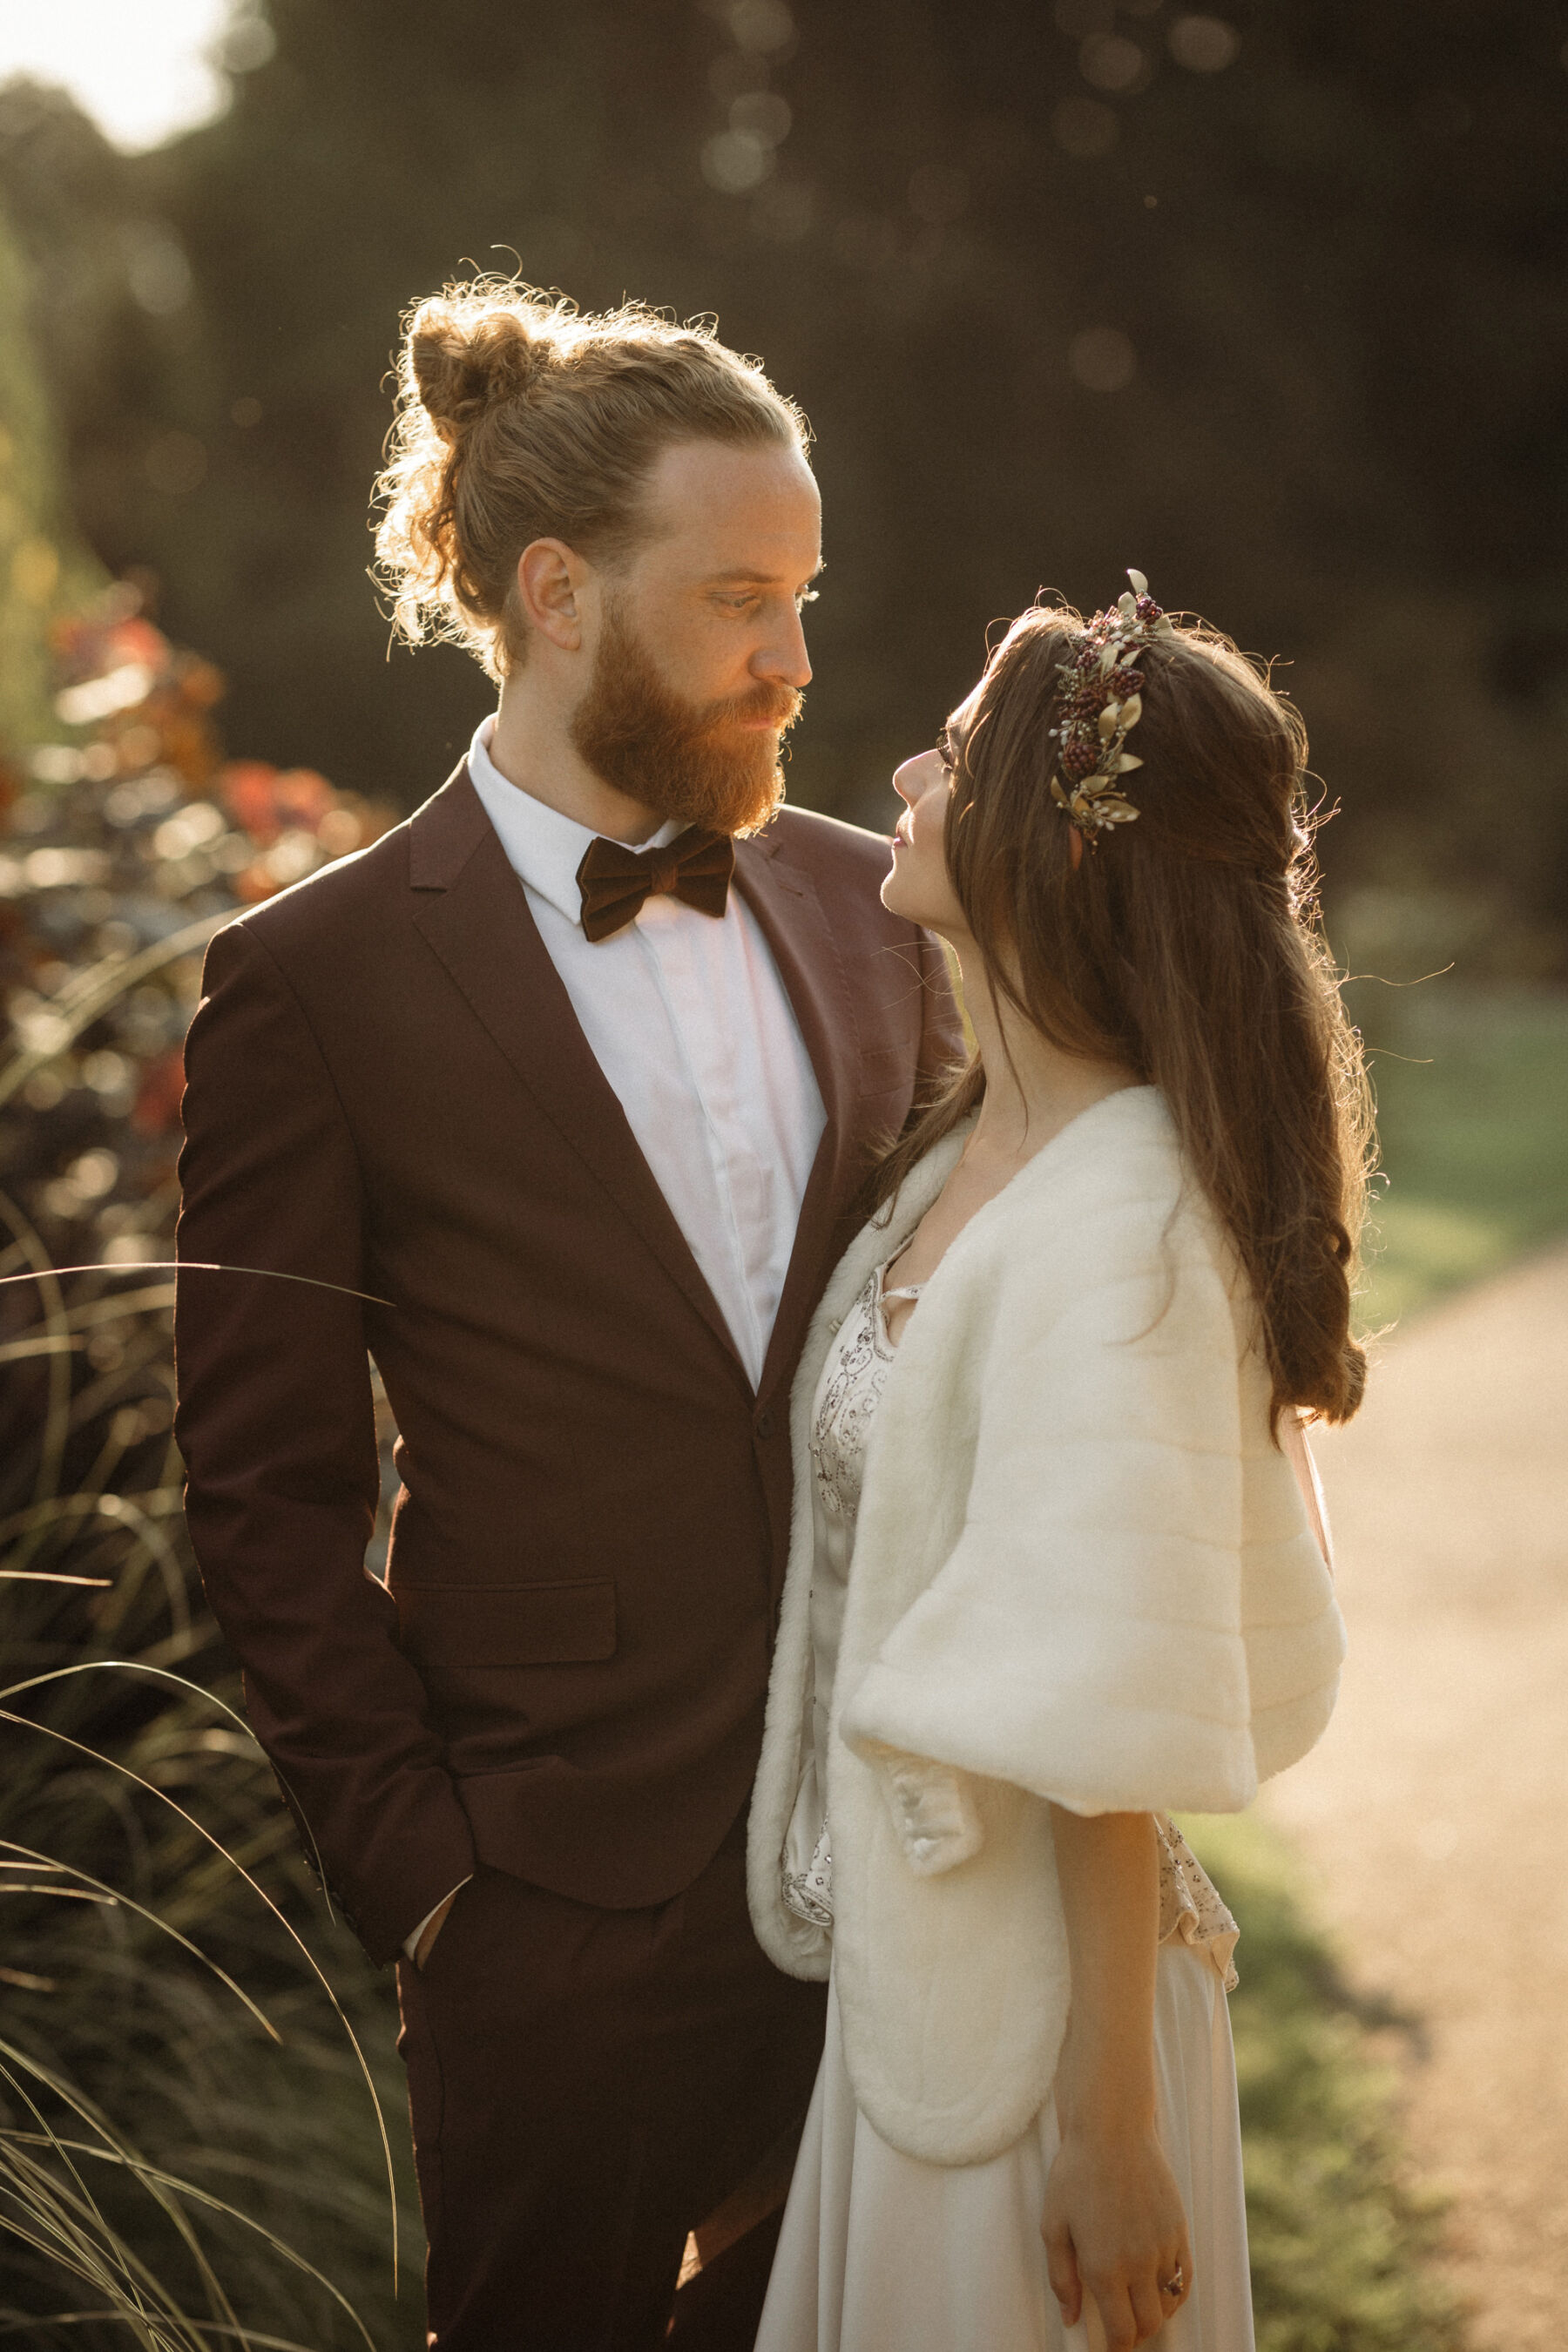 Bride in vintage dress, groom with a hair bun, bow tie and brown suit